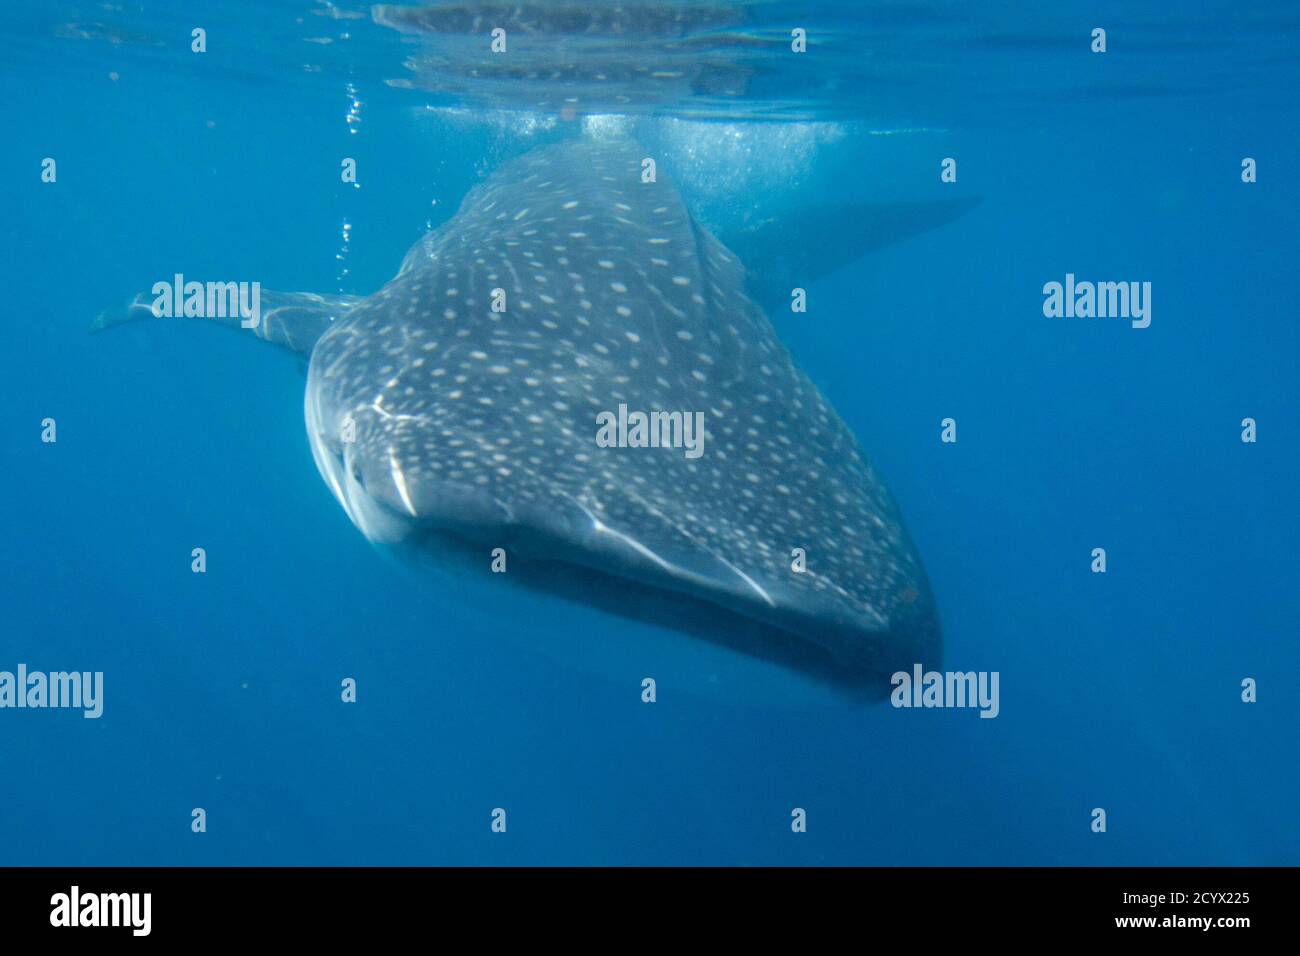 A whale shark (Rhincodon typus) swims in the Caribbean Sea in Isla Mujeres July 14, 2011.The Whale Shark Annual Festival has been taking place in Isla Mujeres since 2008 to promote eco-tourism, and the conservation of this species considered vulnerable under the the IUCN Red List of Threatened Species. REUTERS/Victor Ruiz Garcia (MEXICO  - Tags: ANIMALS SOCIETY) Stock Photo